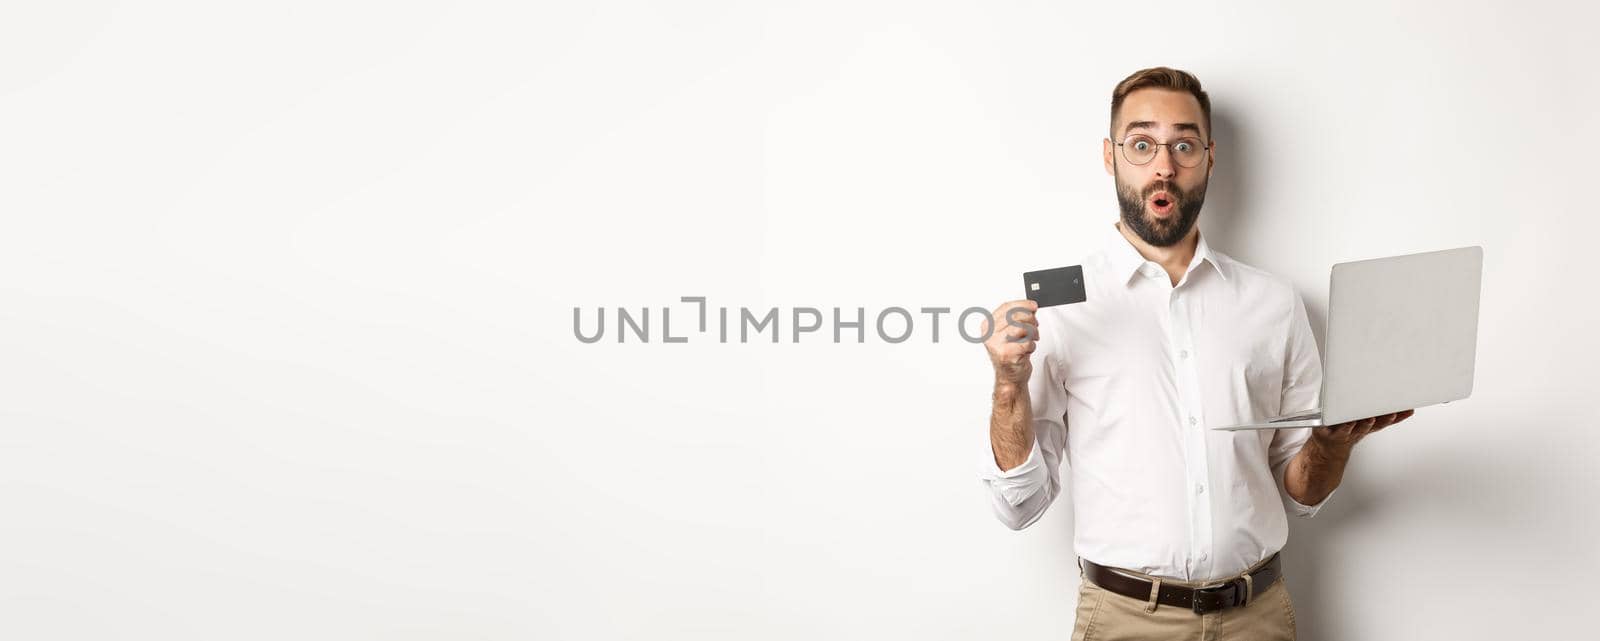 Online shopping. Surprised man holding laptop and credit card, shop internet store, standing over white background.